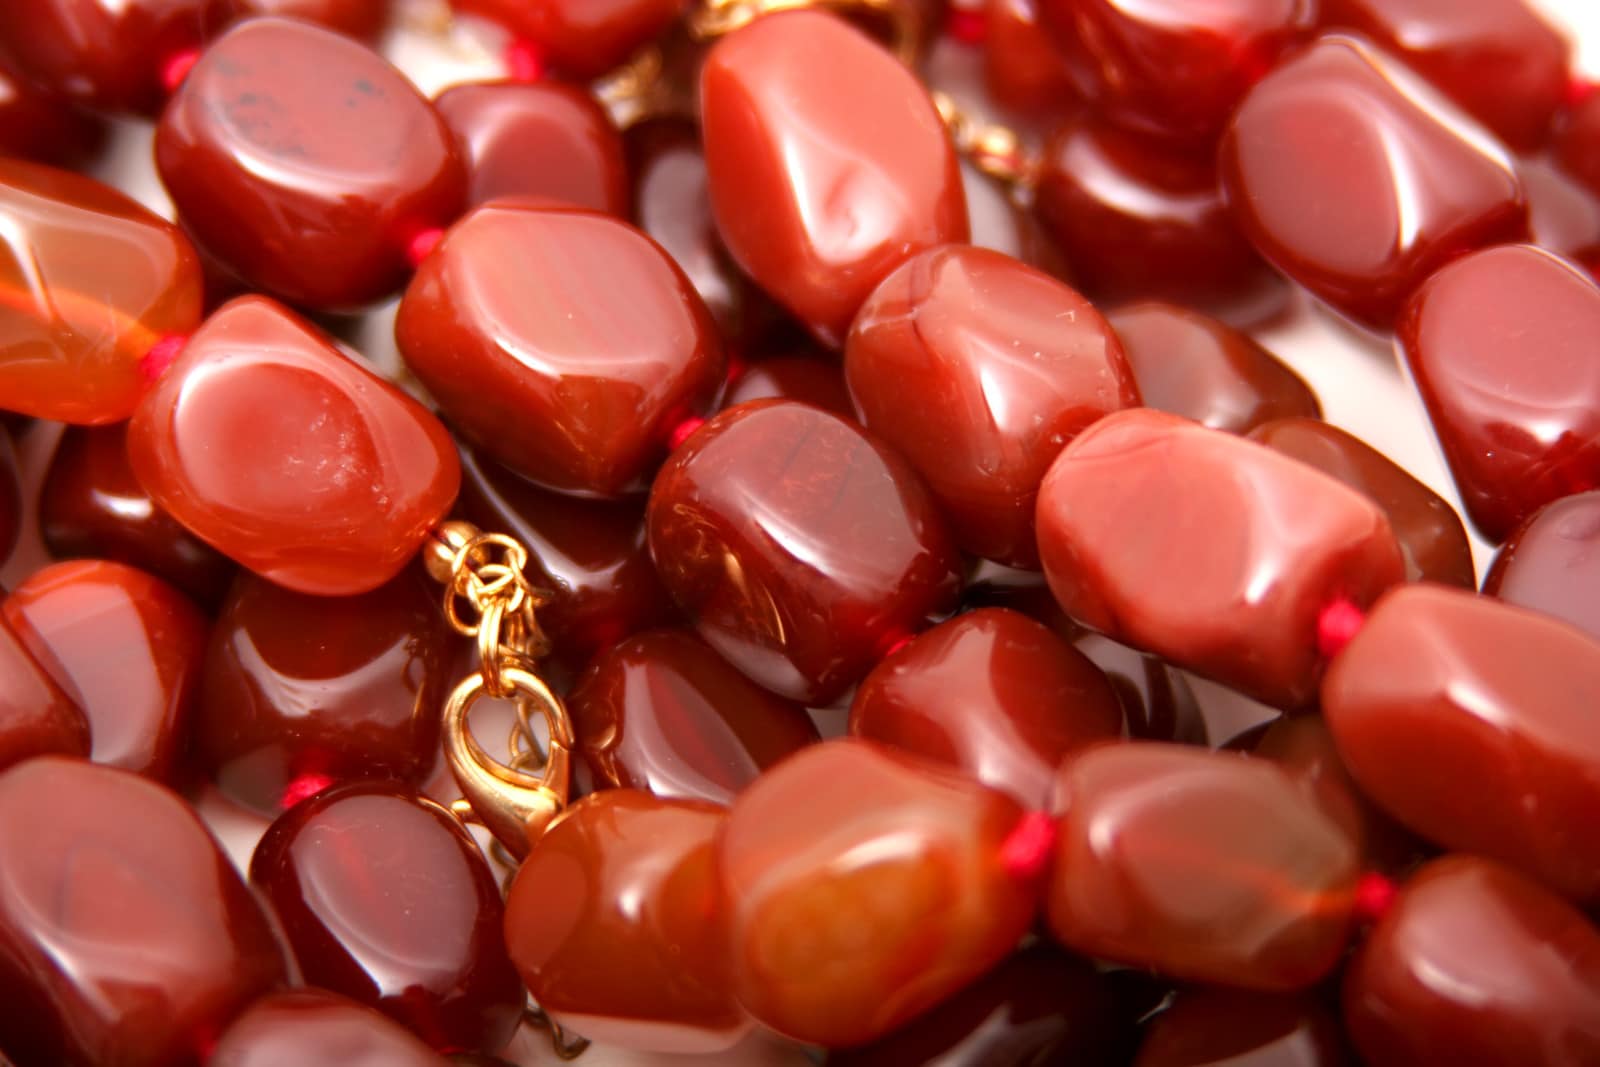 A close-up of polished red carnelian gemstones and beads with a gold clasp, creating a luxurious and vibrant background for a witchy or occult-themed metaphysical shop.